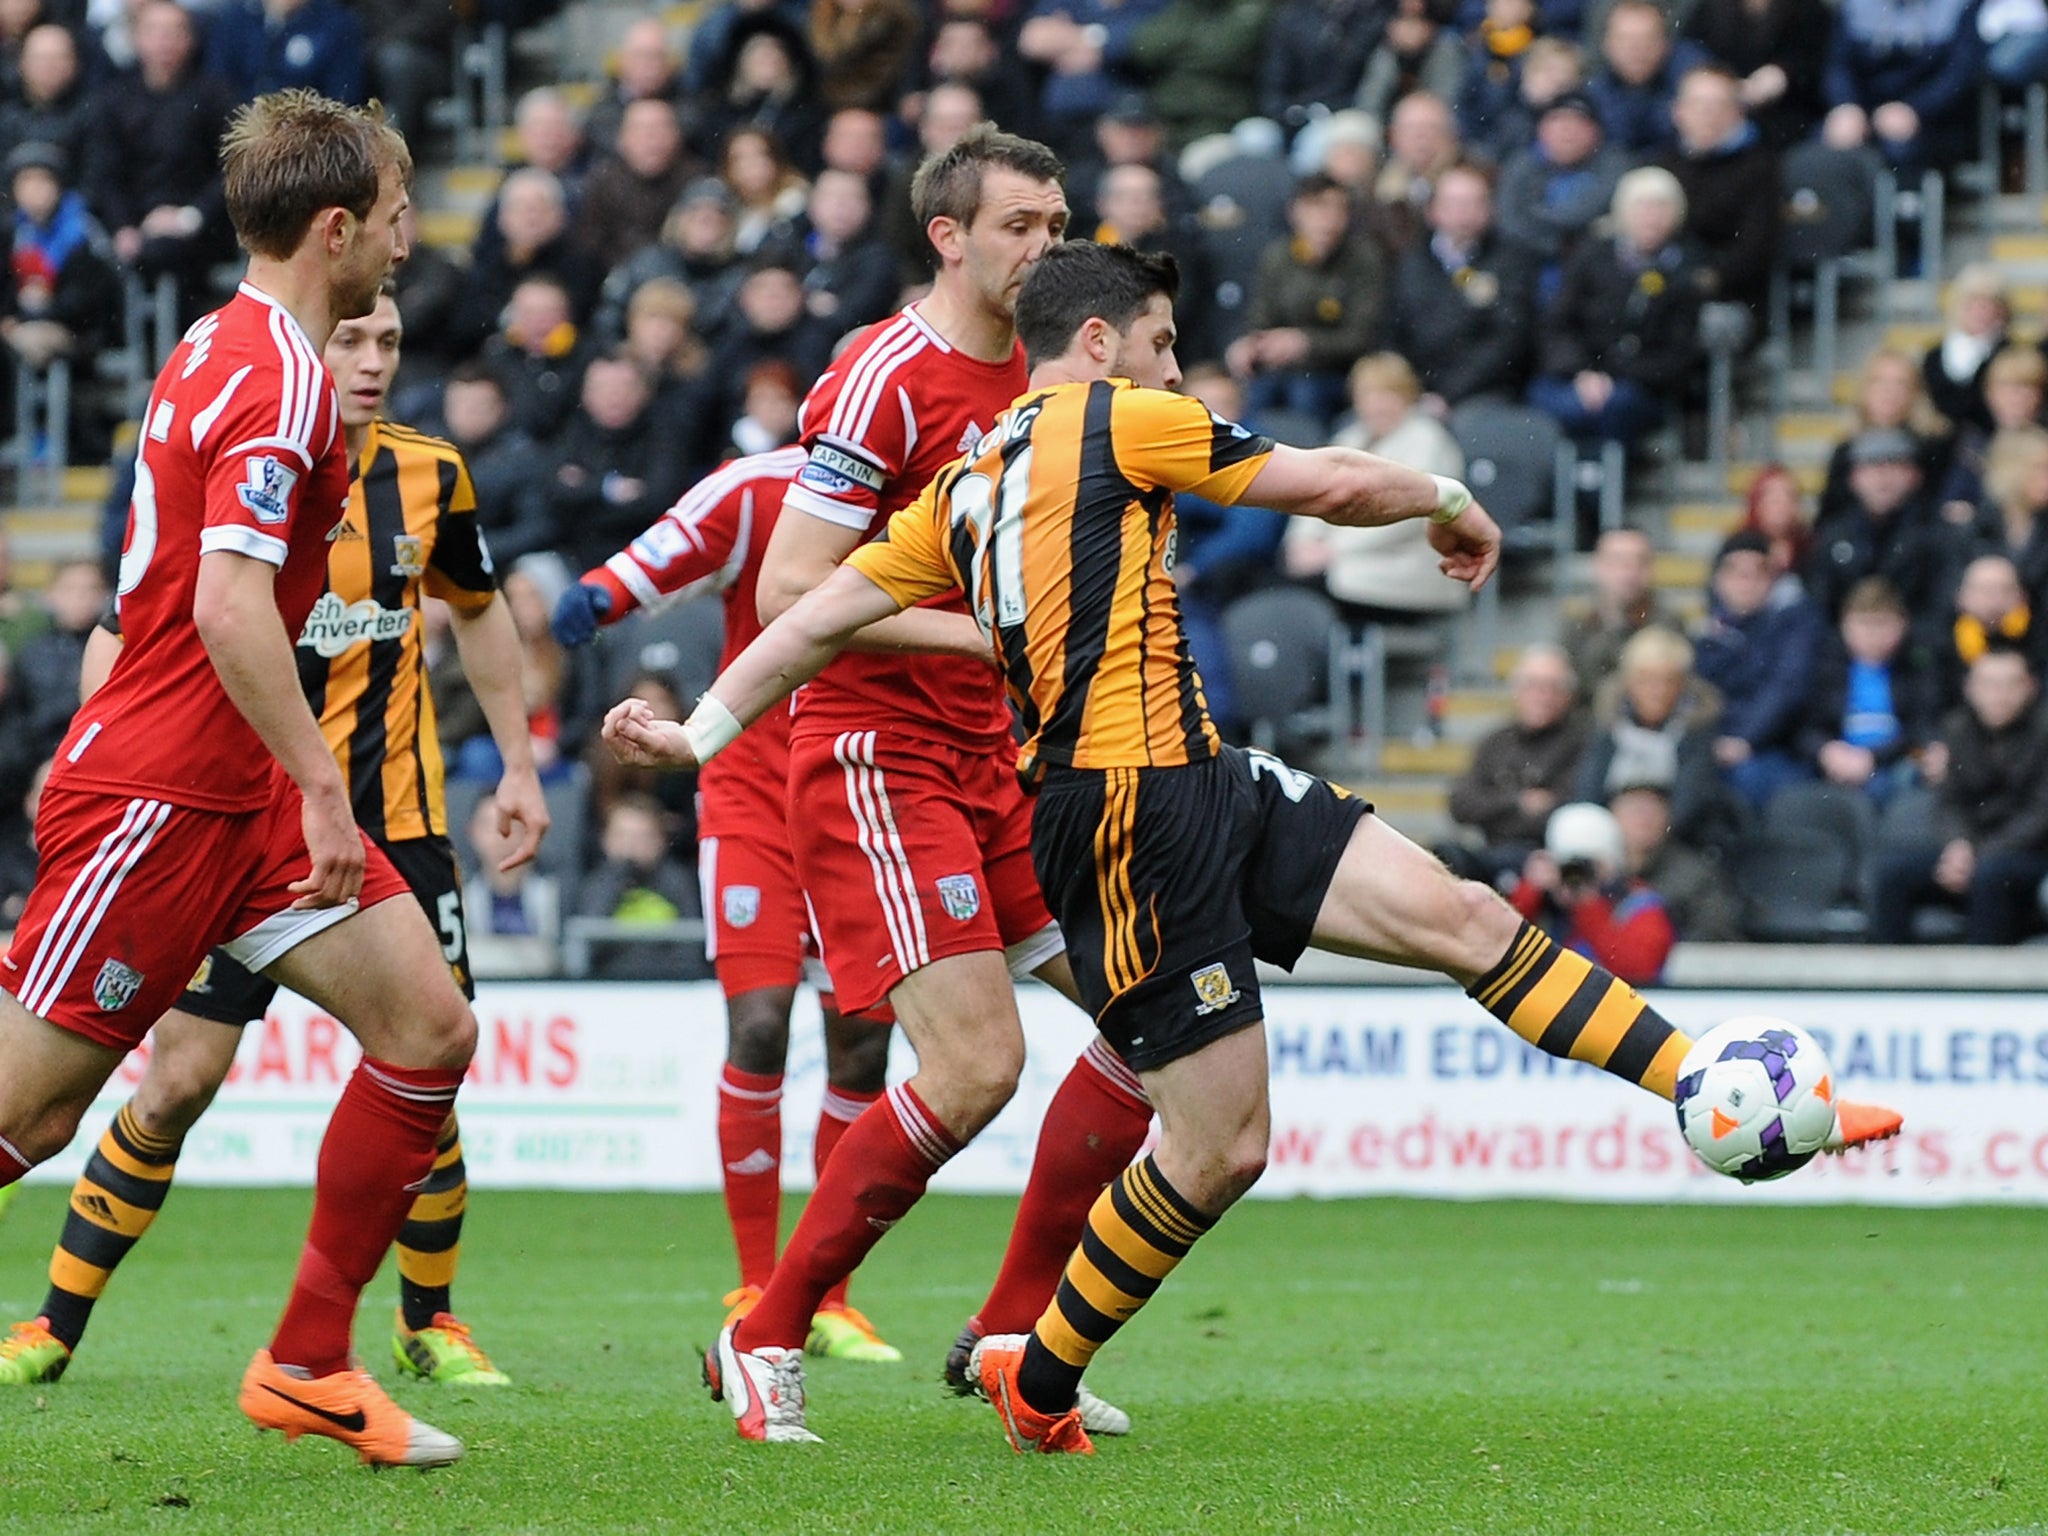 Shane Long scores for Hull against his former club West Brom